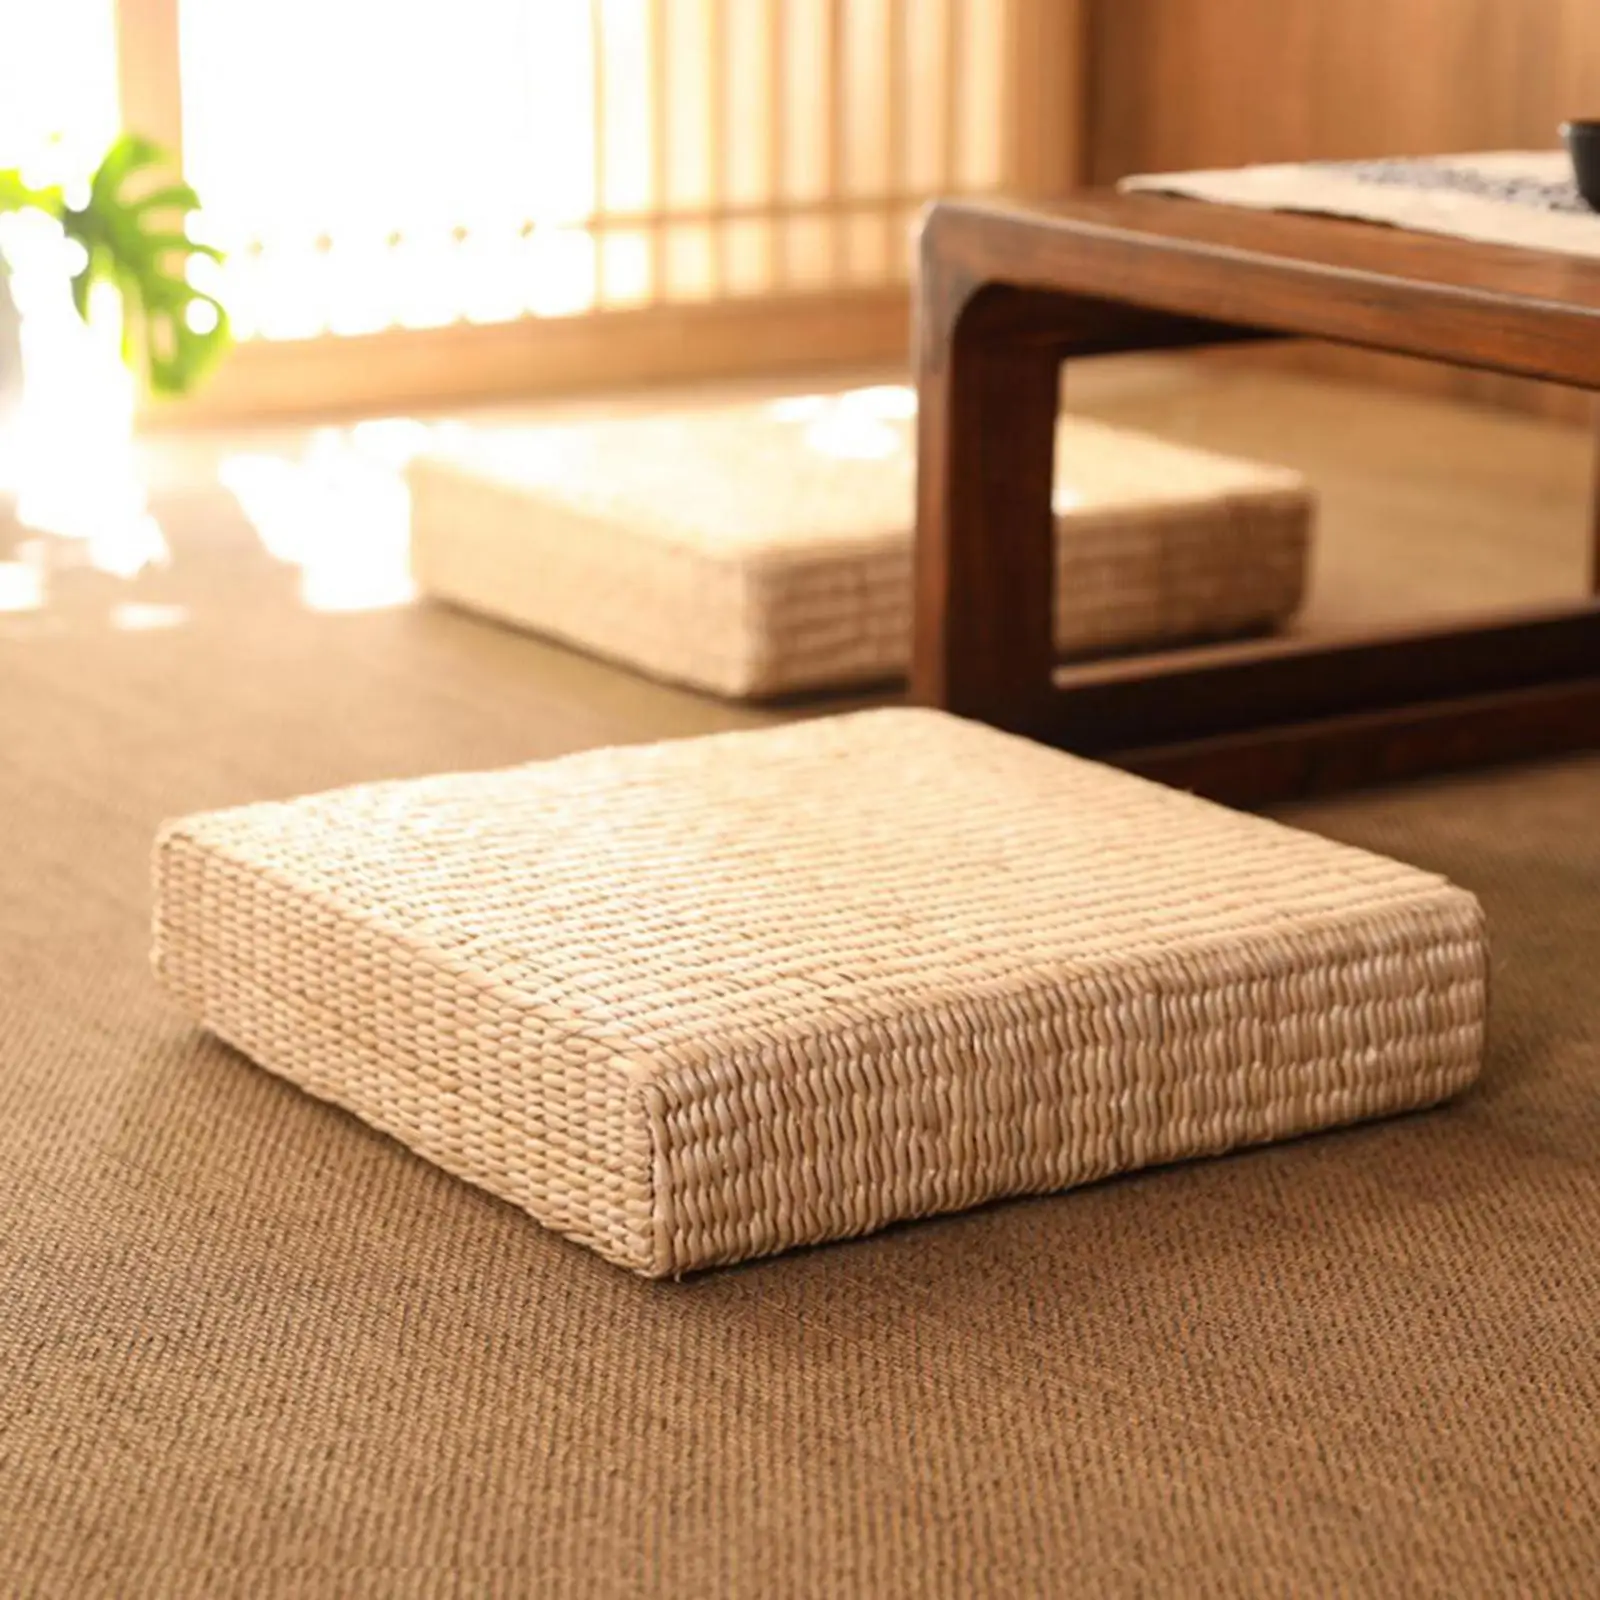 Yoga Pad Multifunctional Pillow Tatami Cushions for Office Dining Room Hotel Home